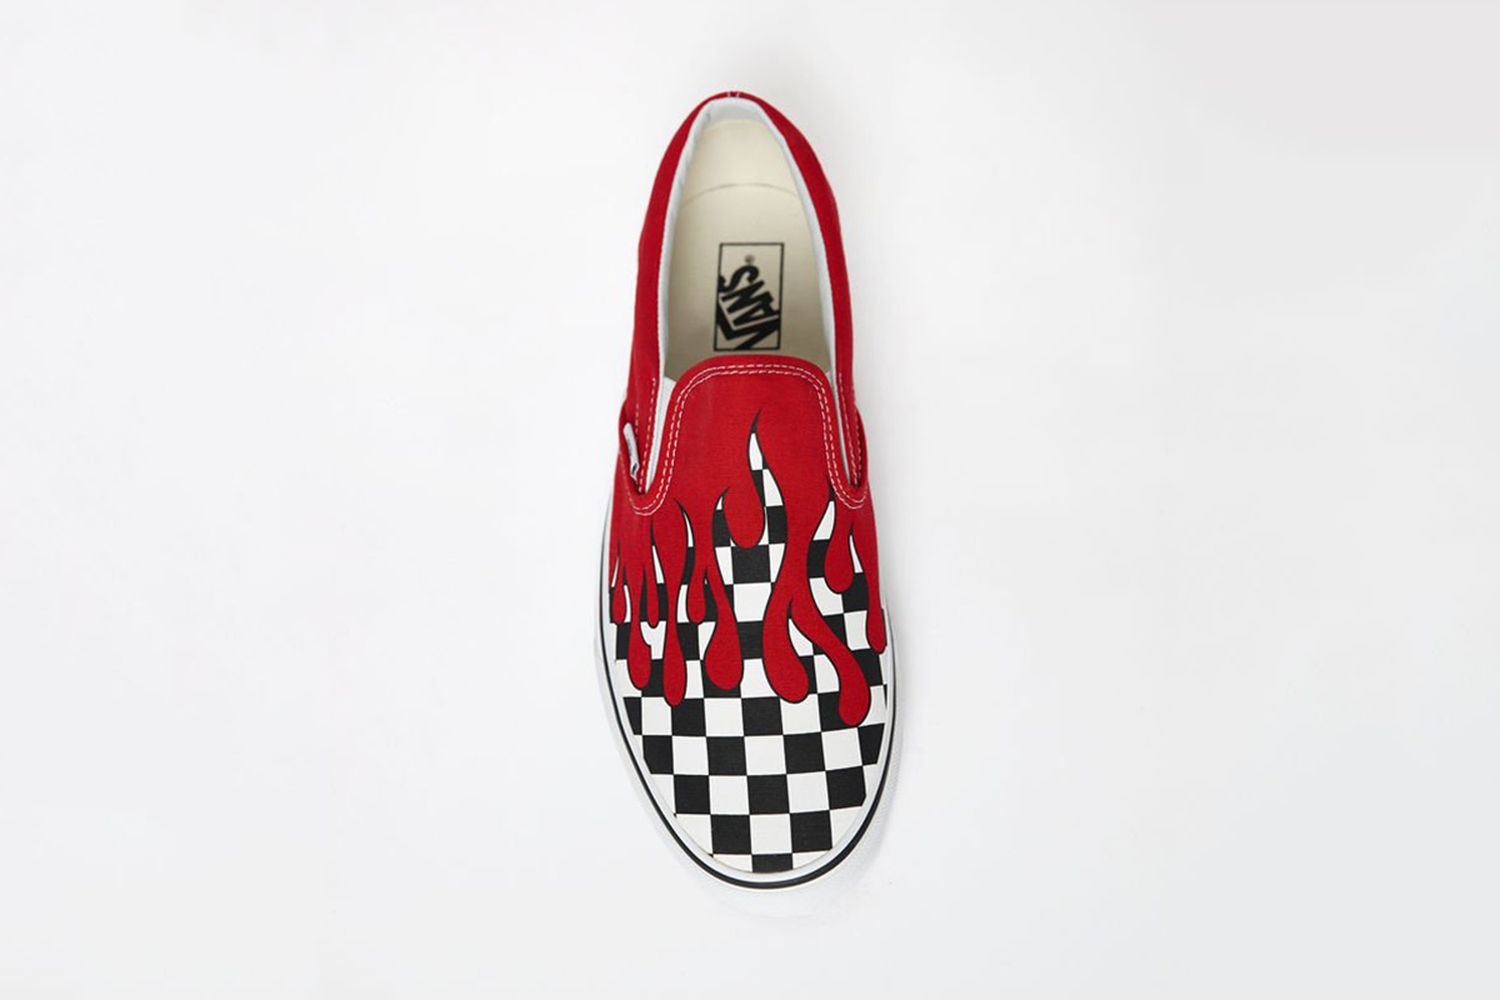 New Vans Mixes and Flame Patterns